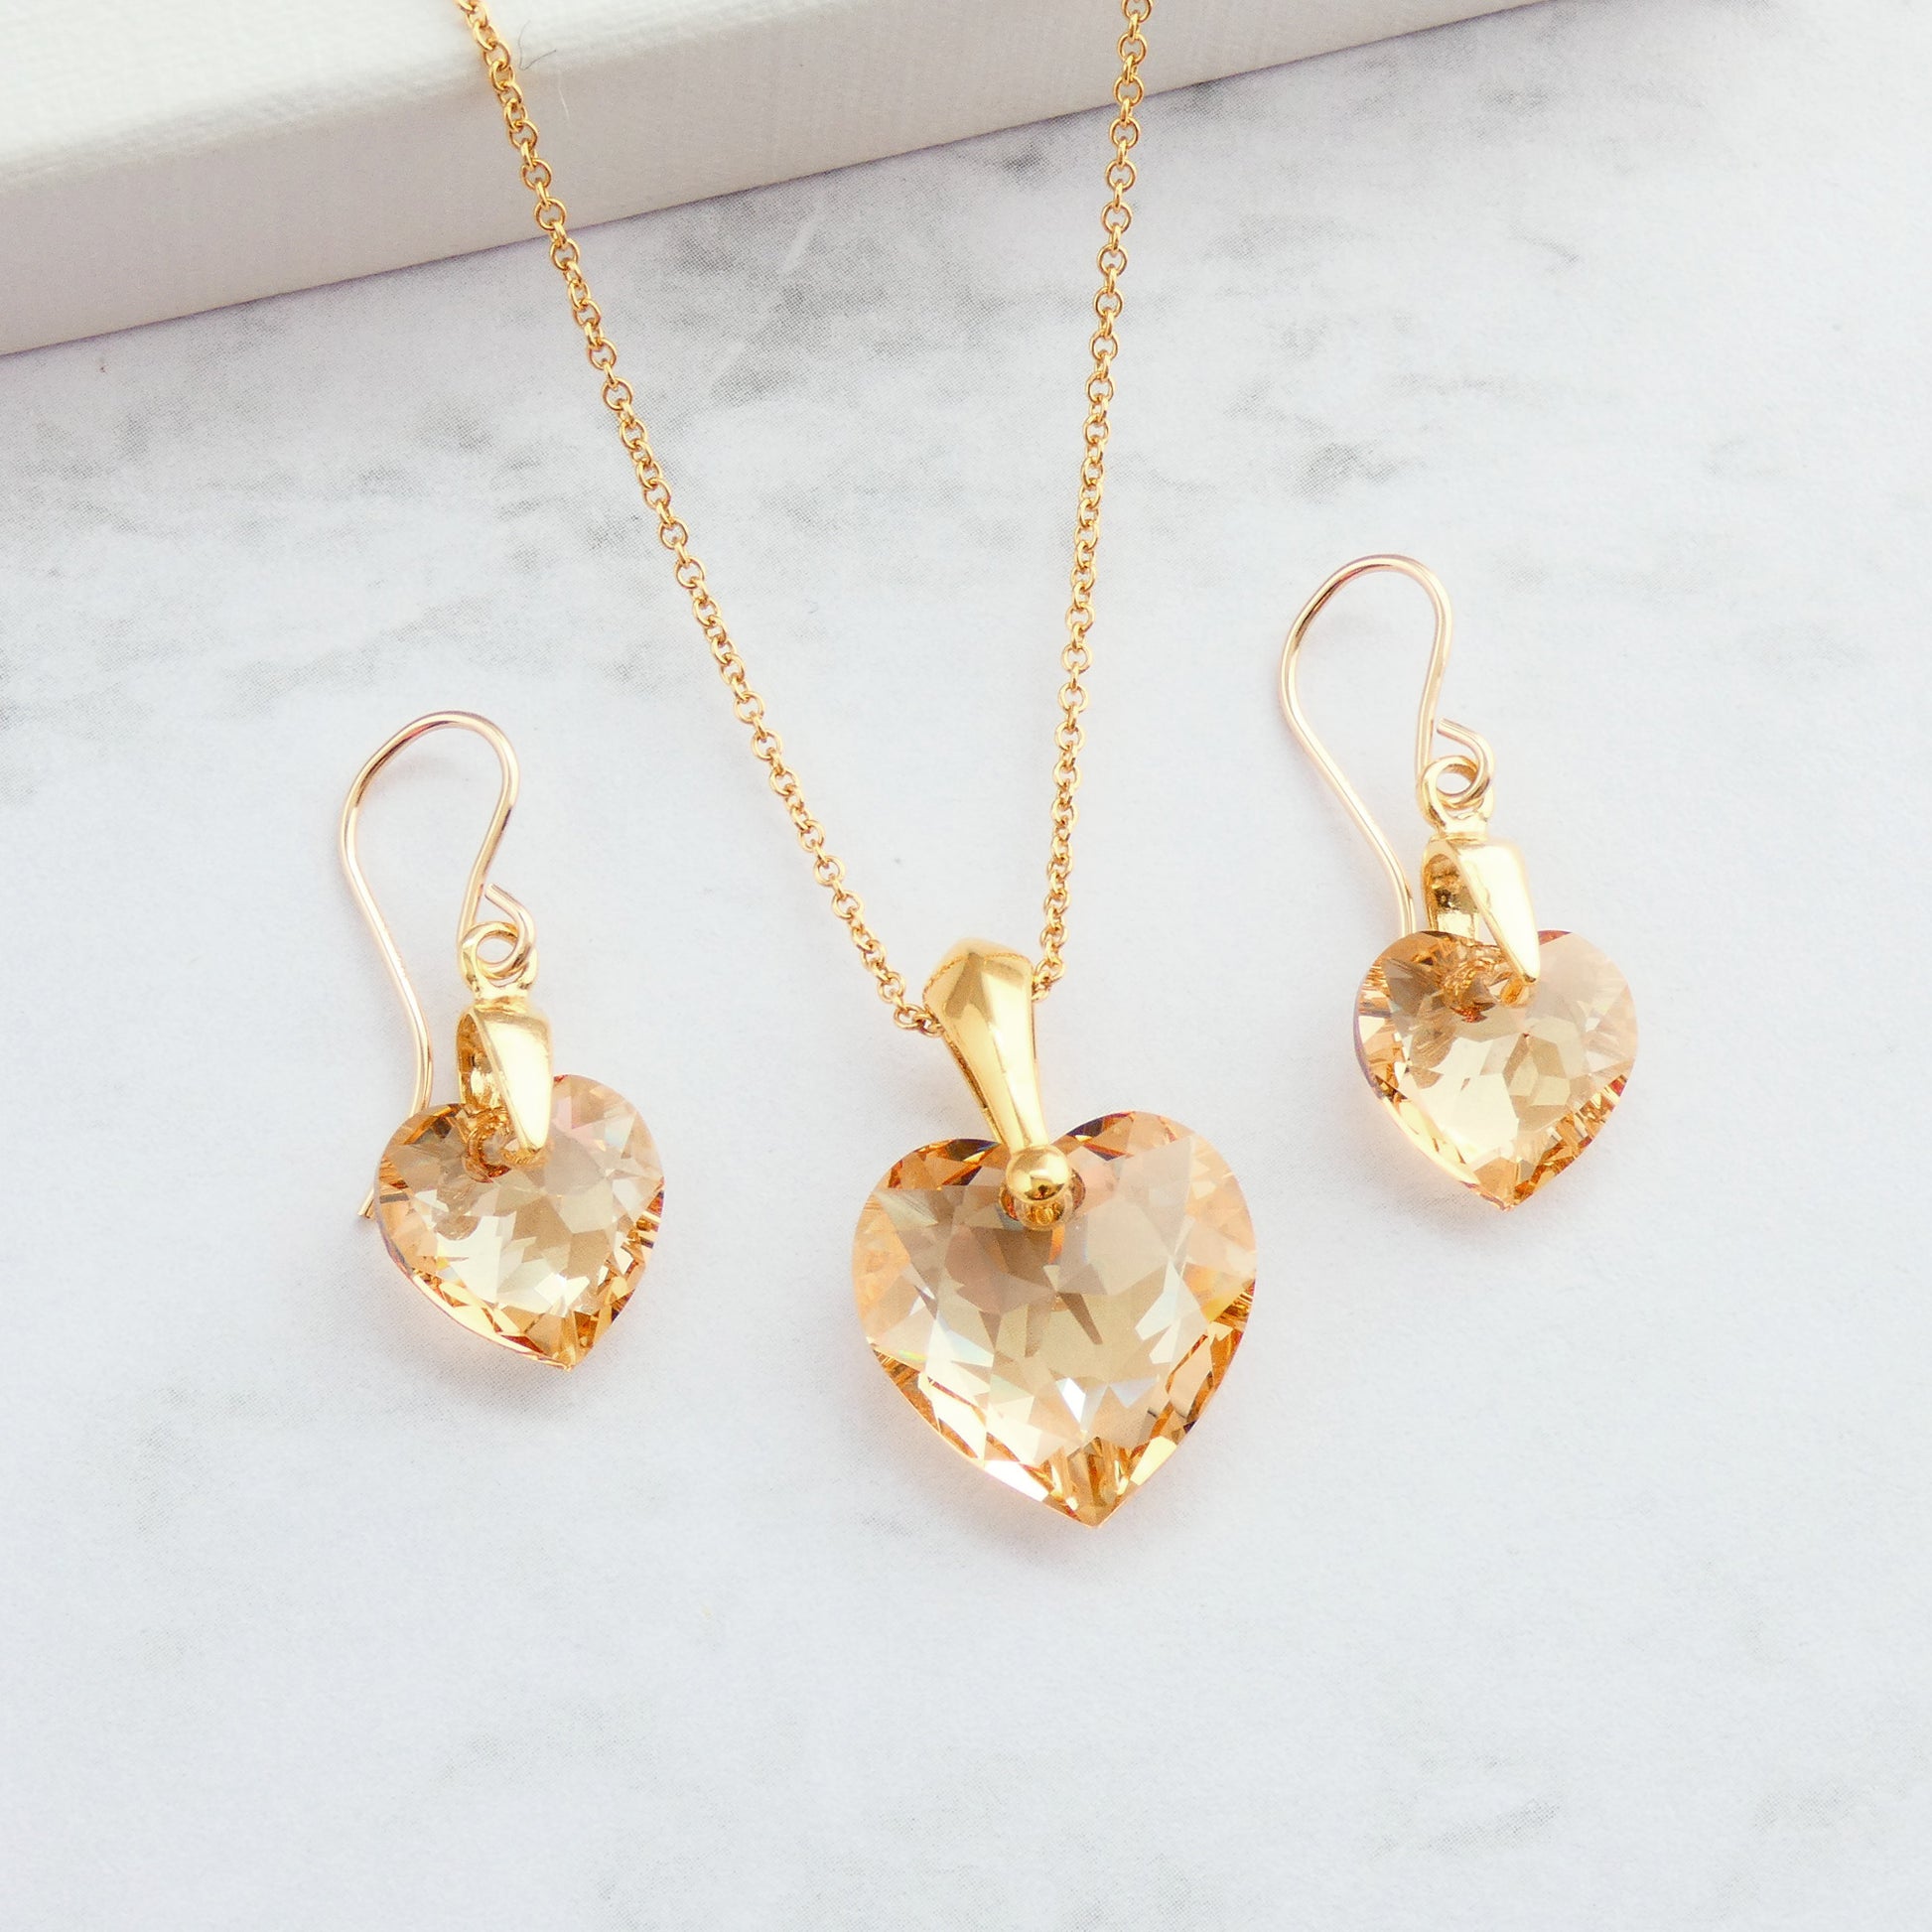 Pale bronze cut crystal heart earrings and necklace set for woment